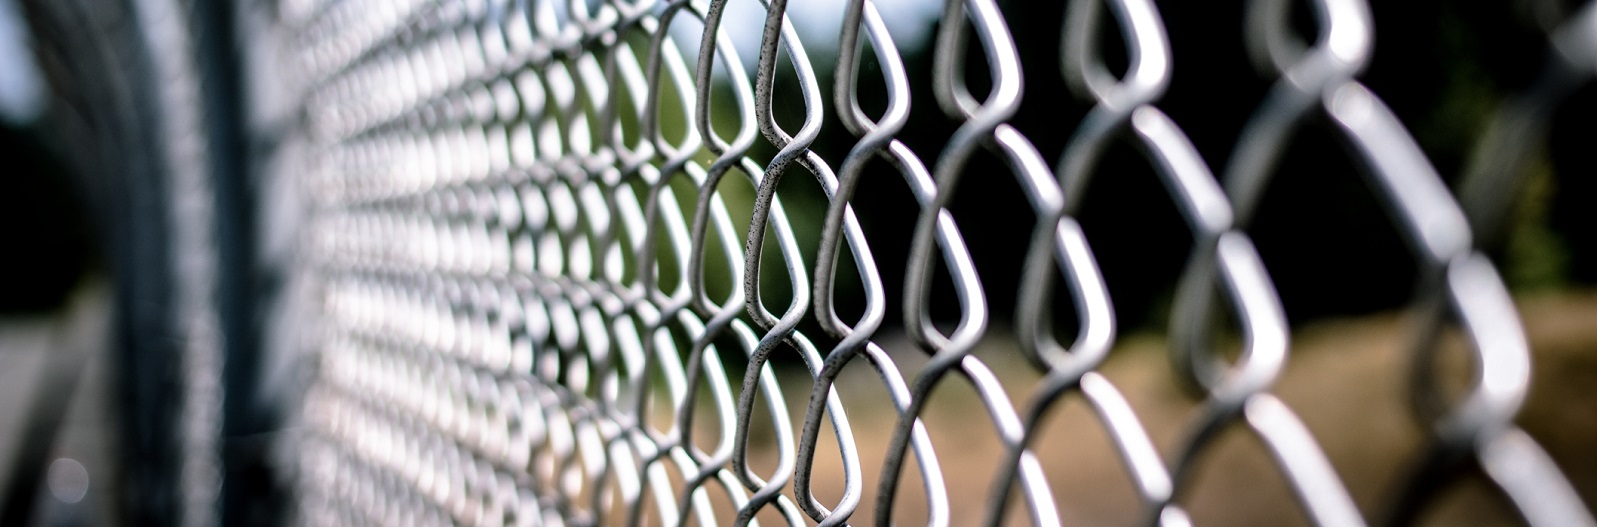 Chain Wire Fencing Close Up